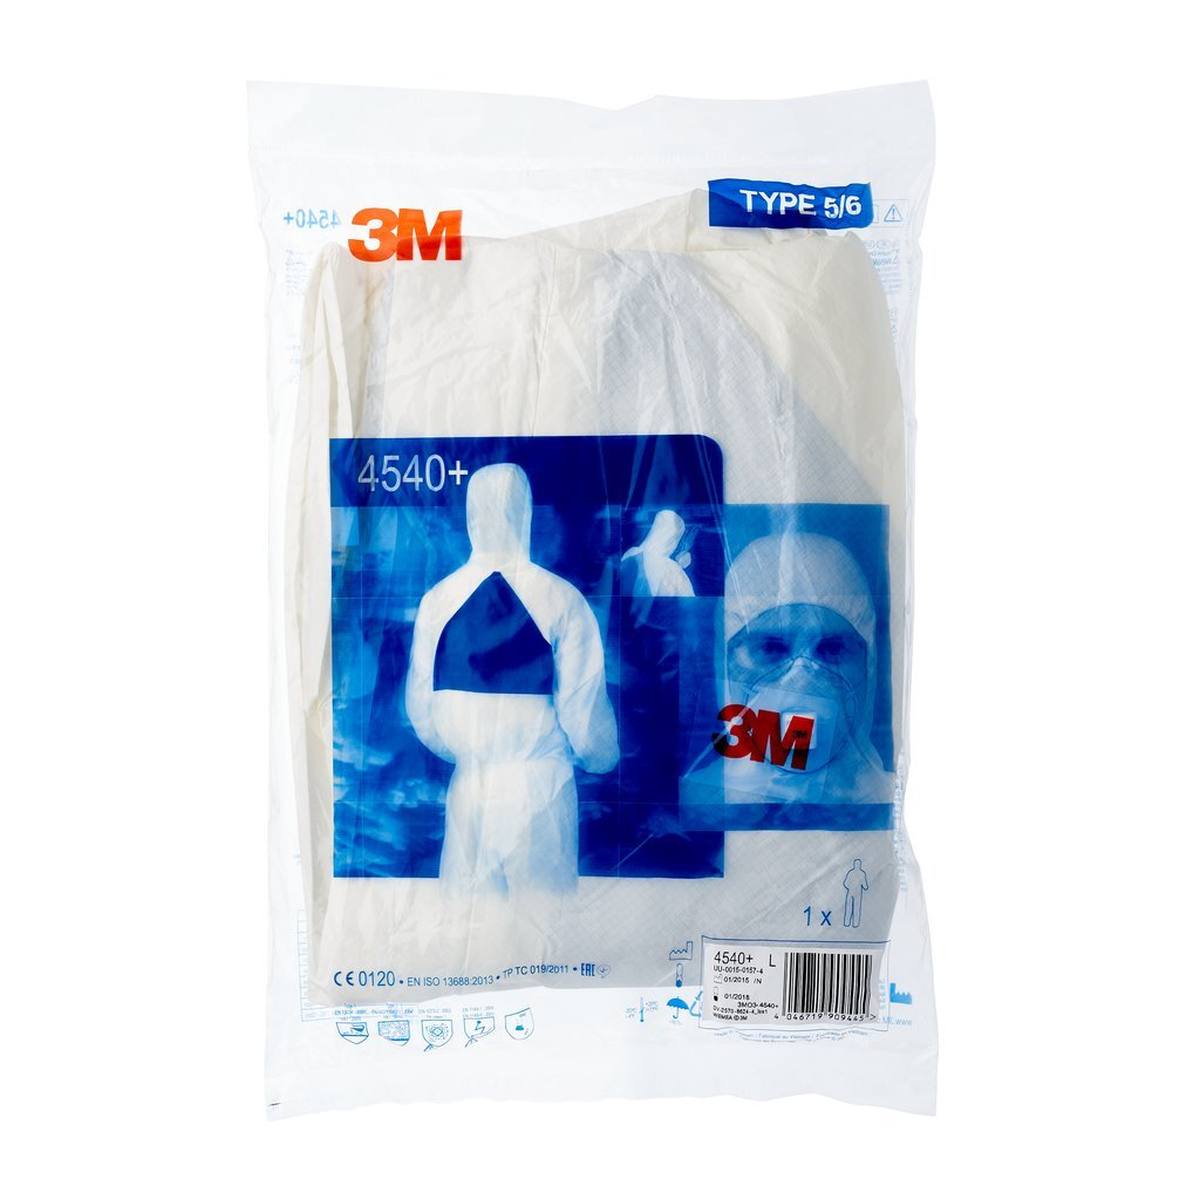 3M 4540+ coverall, white+blue, type 5/6, size M, robust, lint-free, reinforced seams, SMMMS material, breathable, detachable zipper, knitted cuffs